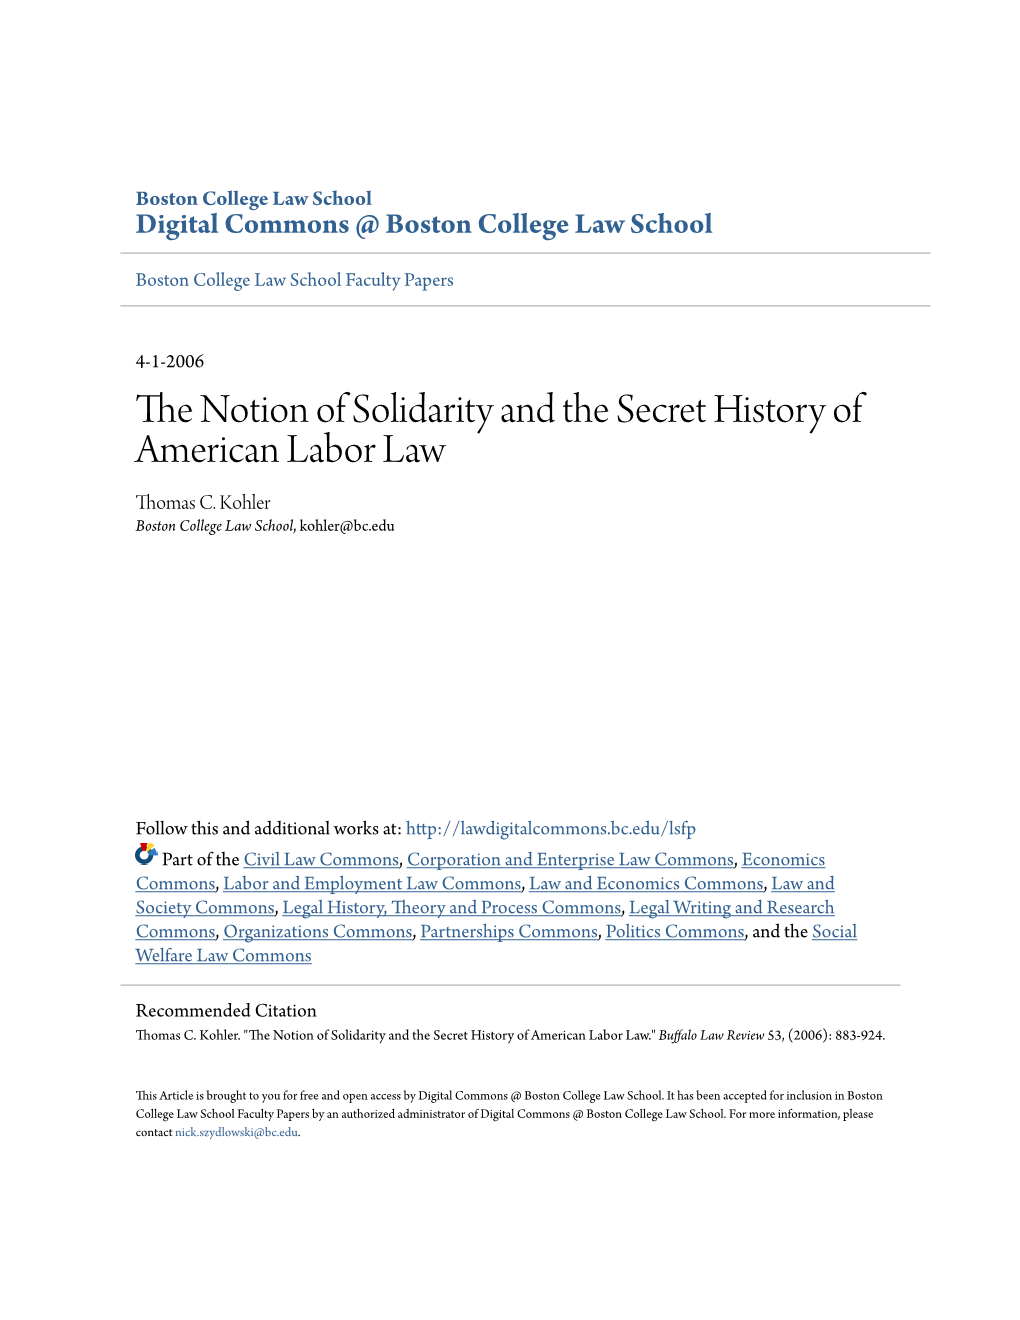 The Notion of Solidarity and the Secret History of American Labor Law